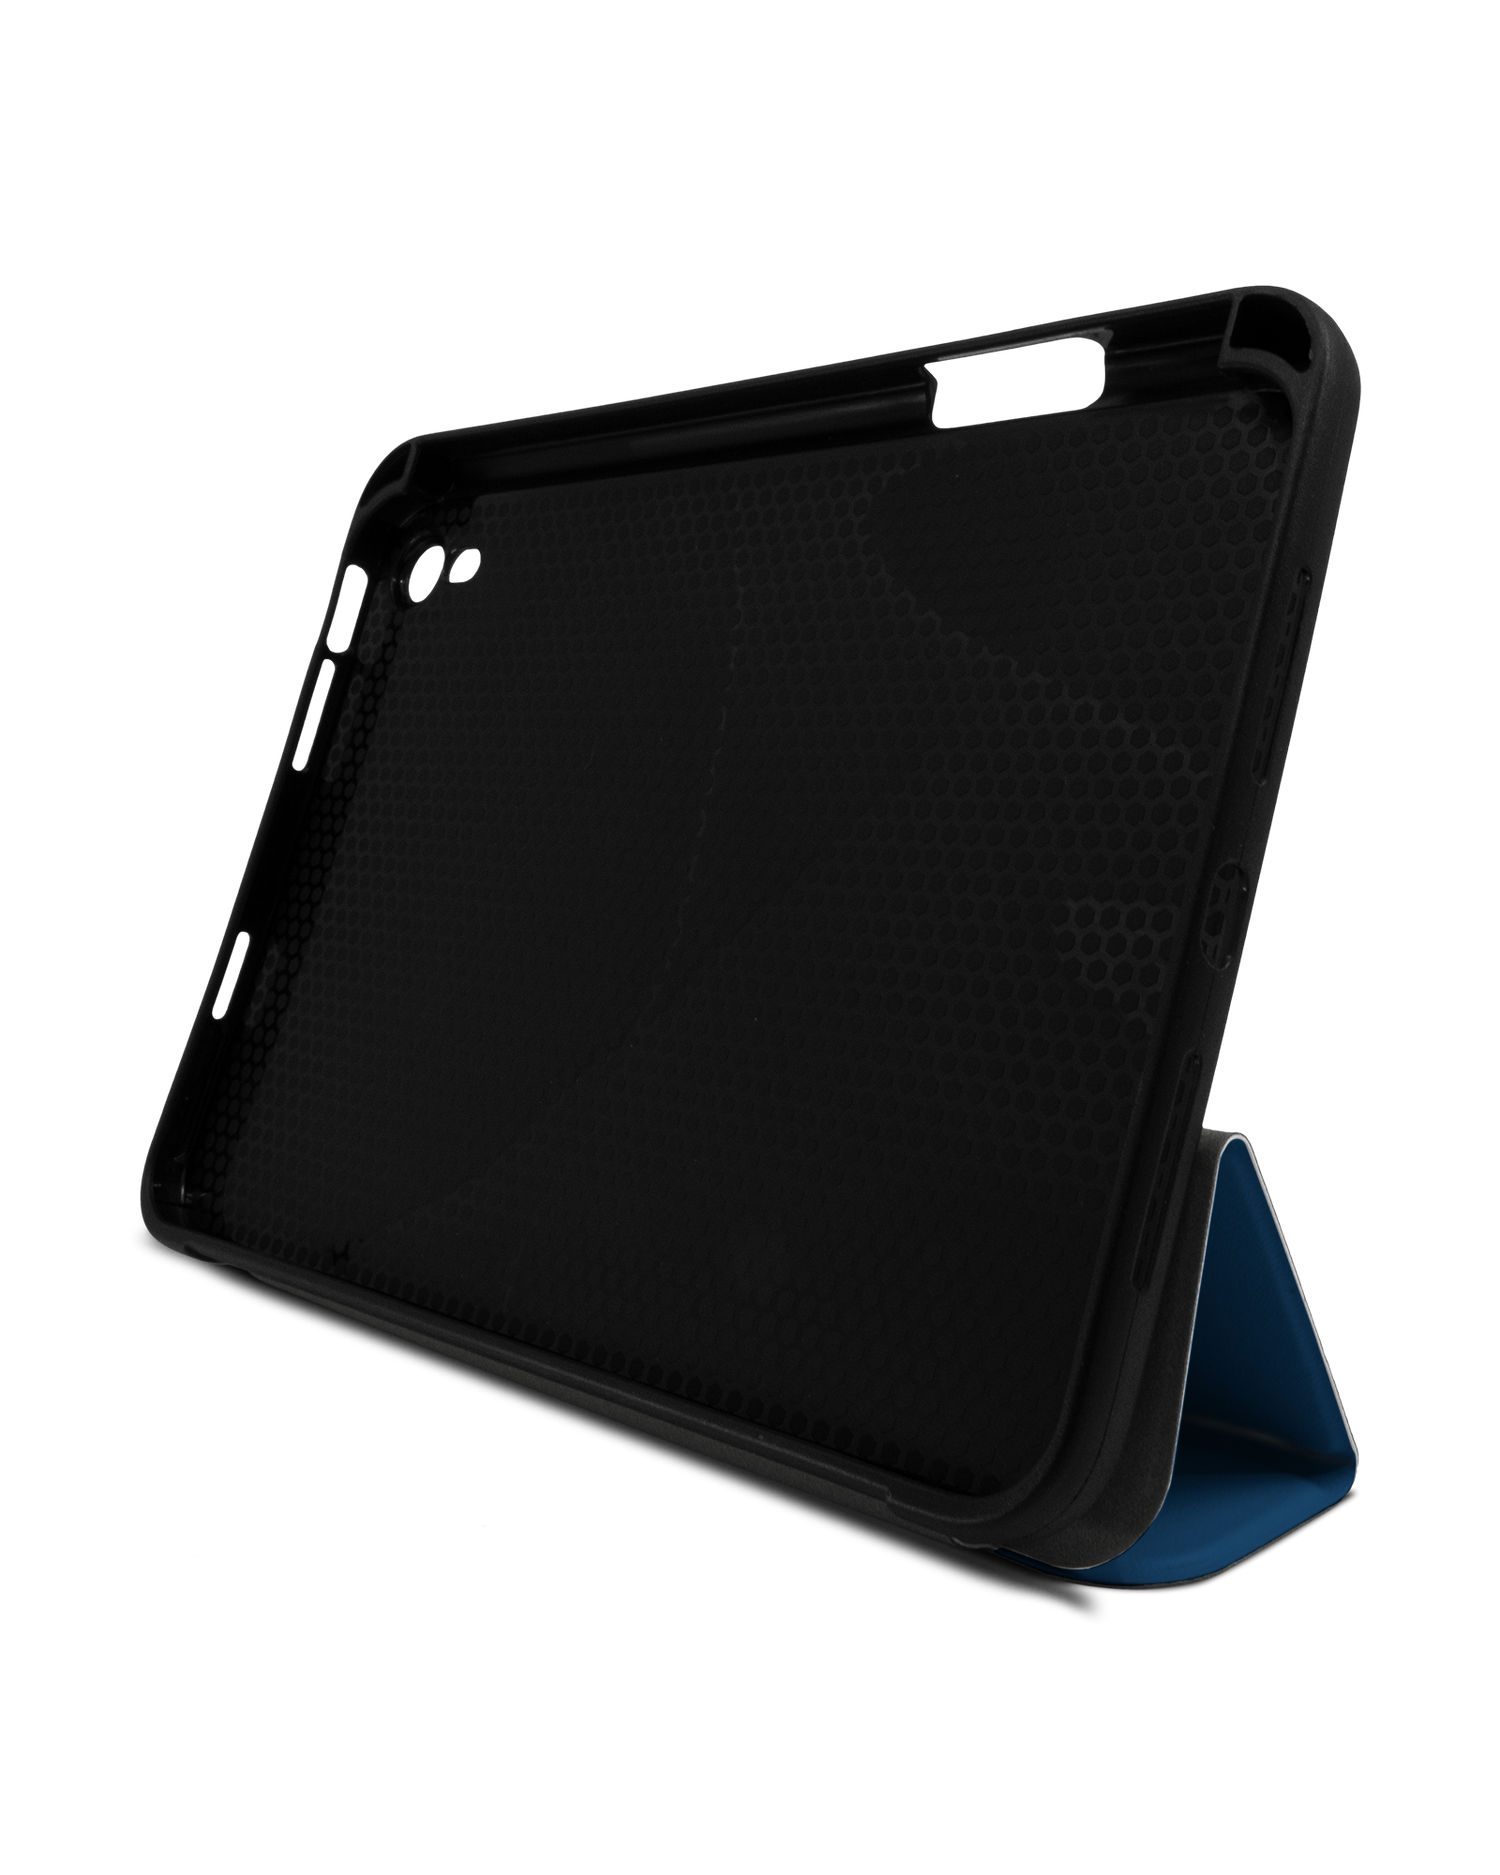 CLASSIC BLUE iPad Case with Pencil Holder Apple iPad mini 6 (2021): Set up in landscape format (front view)